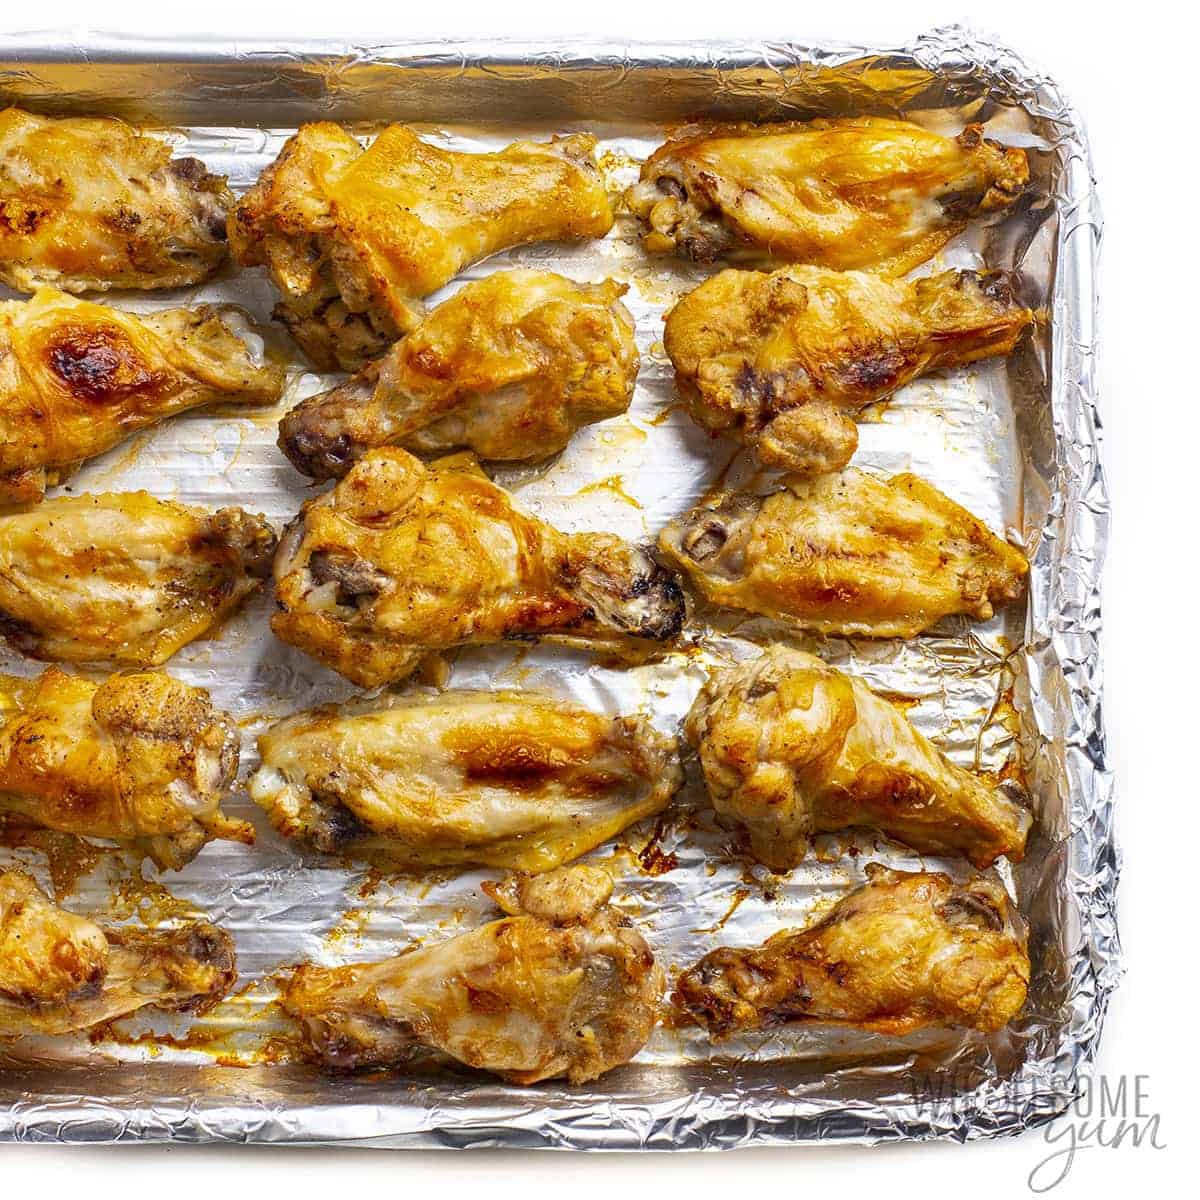 Cooked chicken wings on baking sheet